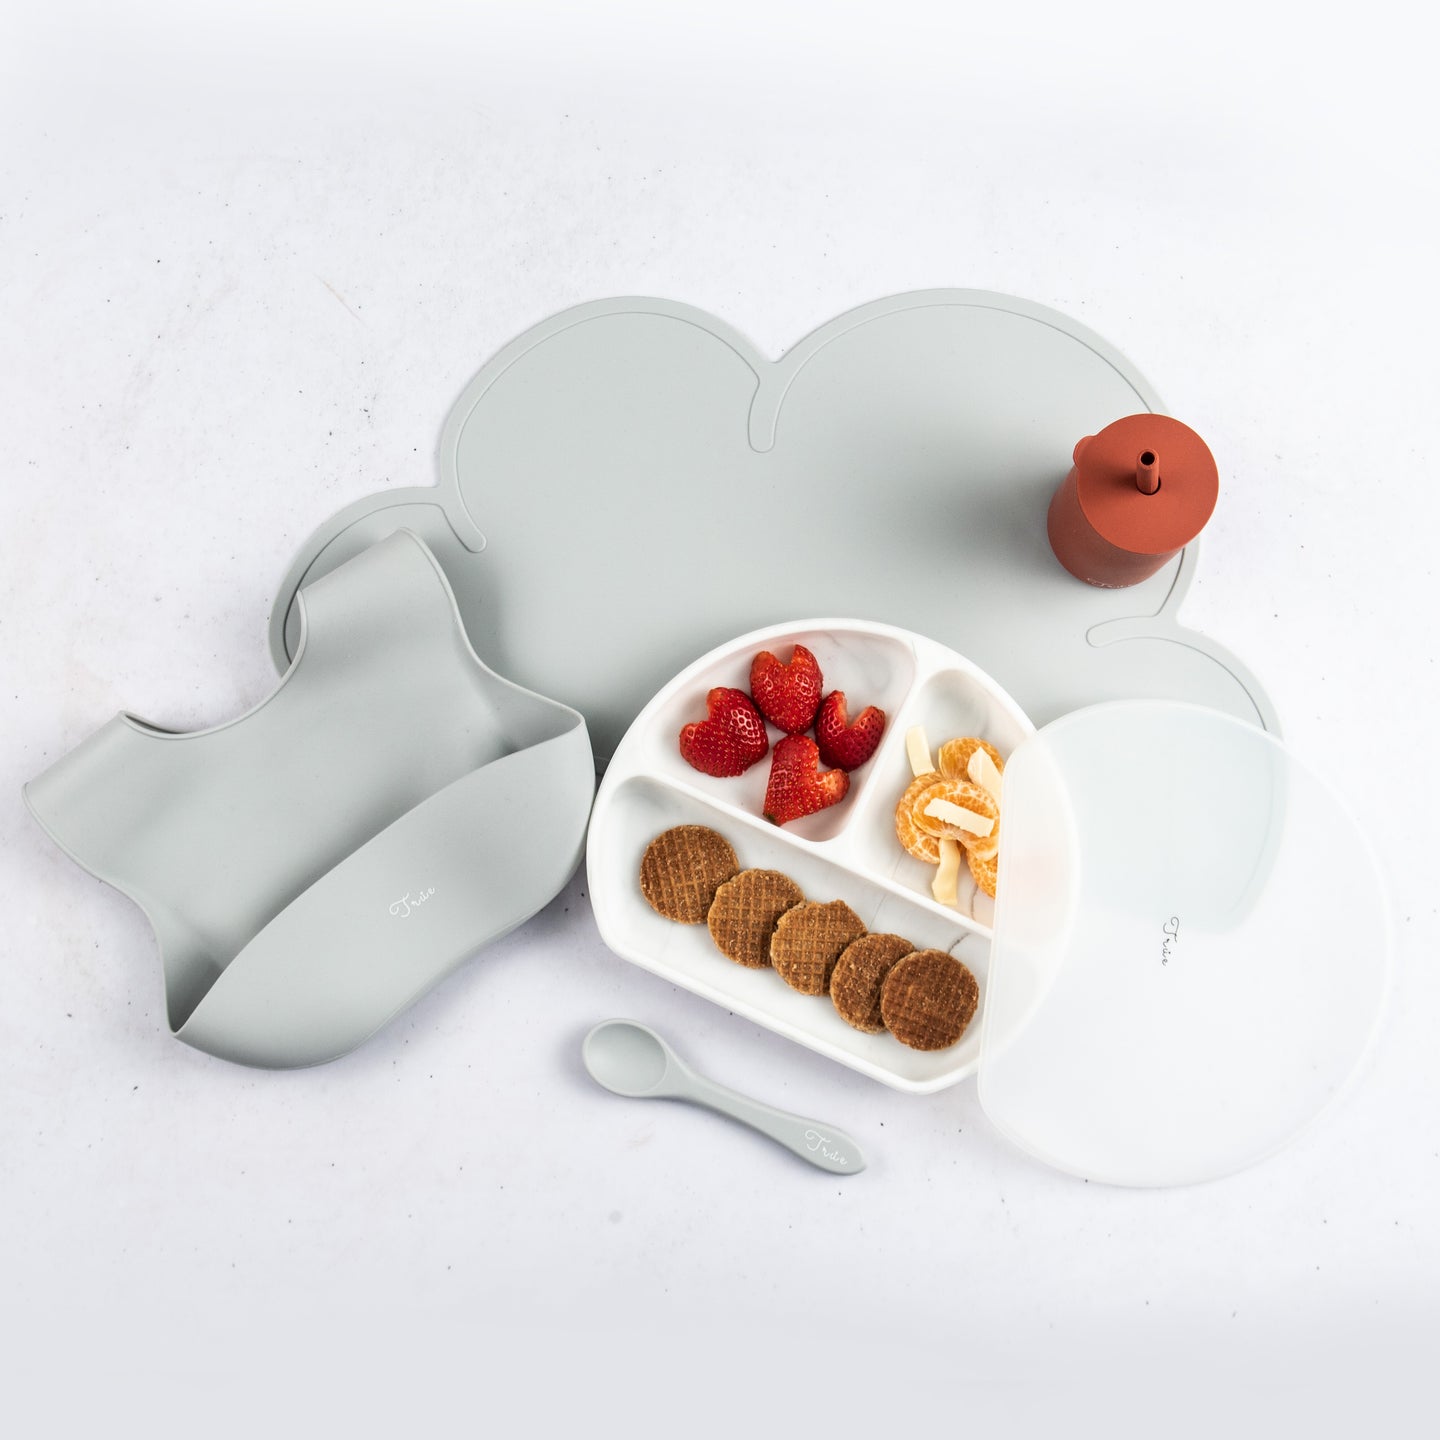 Baby Feeding Essentials: consists of a silicone placemat, divided smile plate, straw cup, bucket bib and spoon.